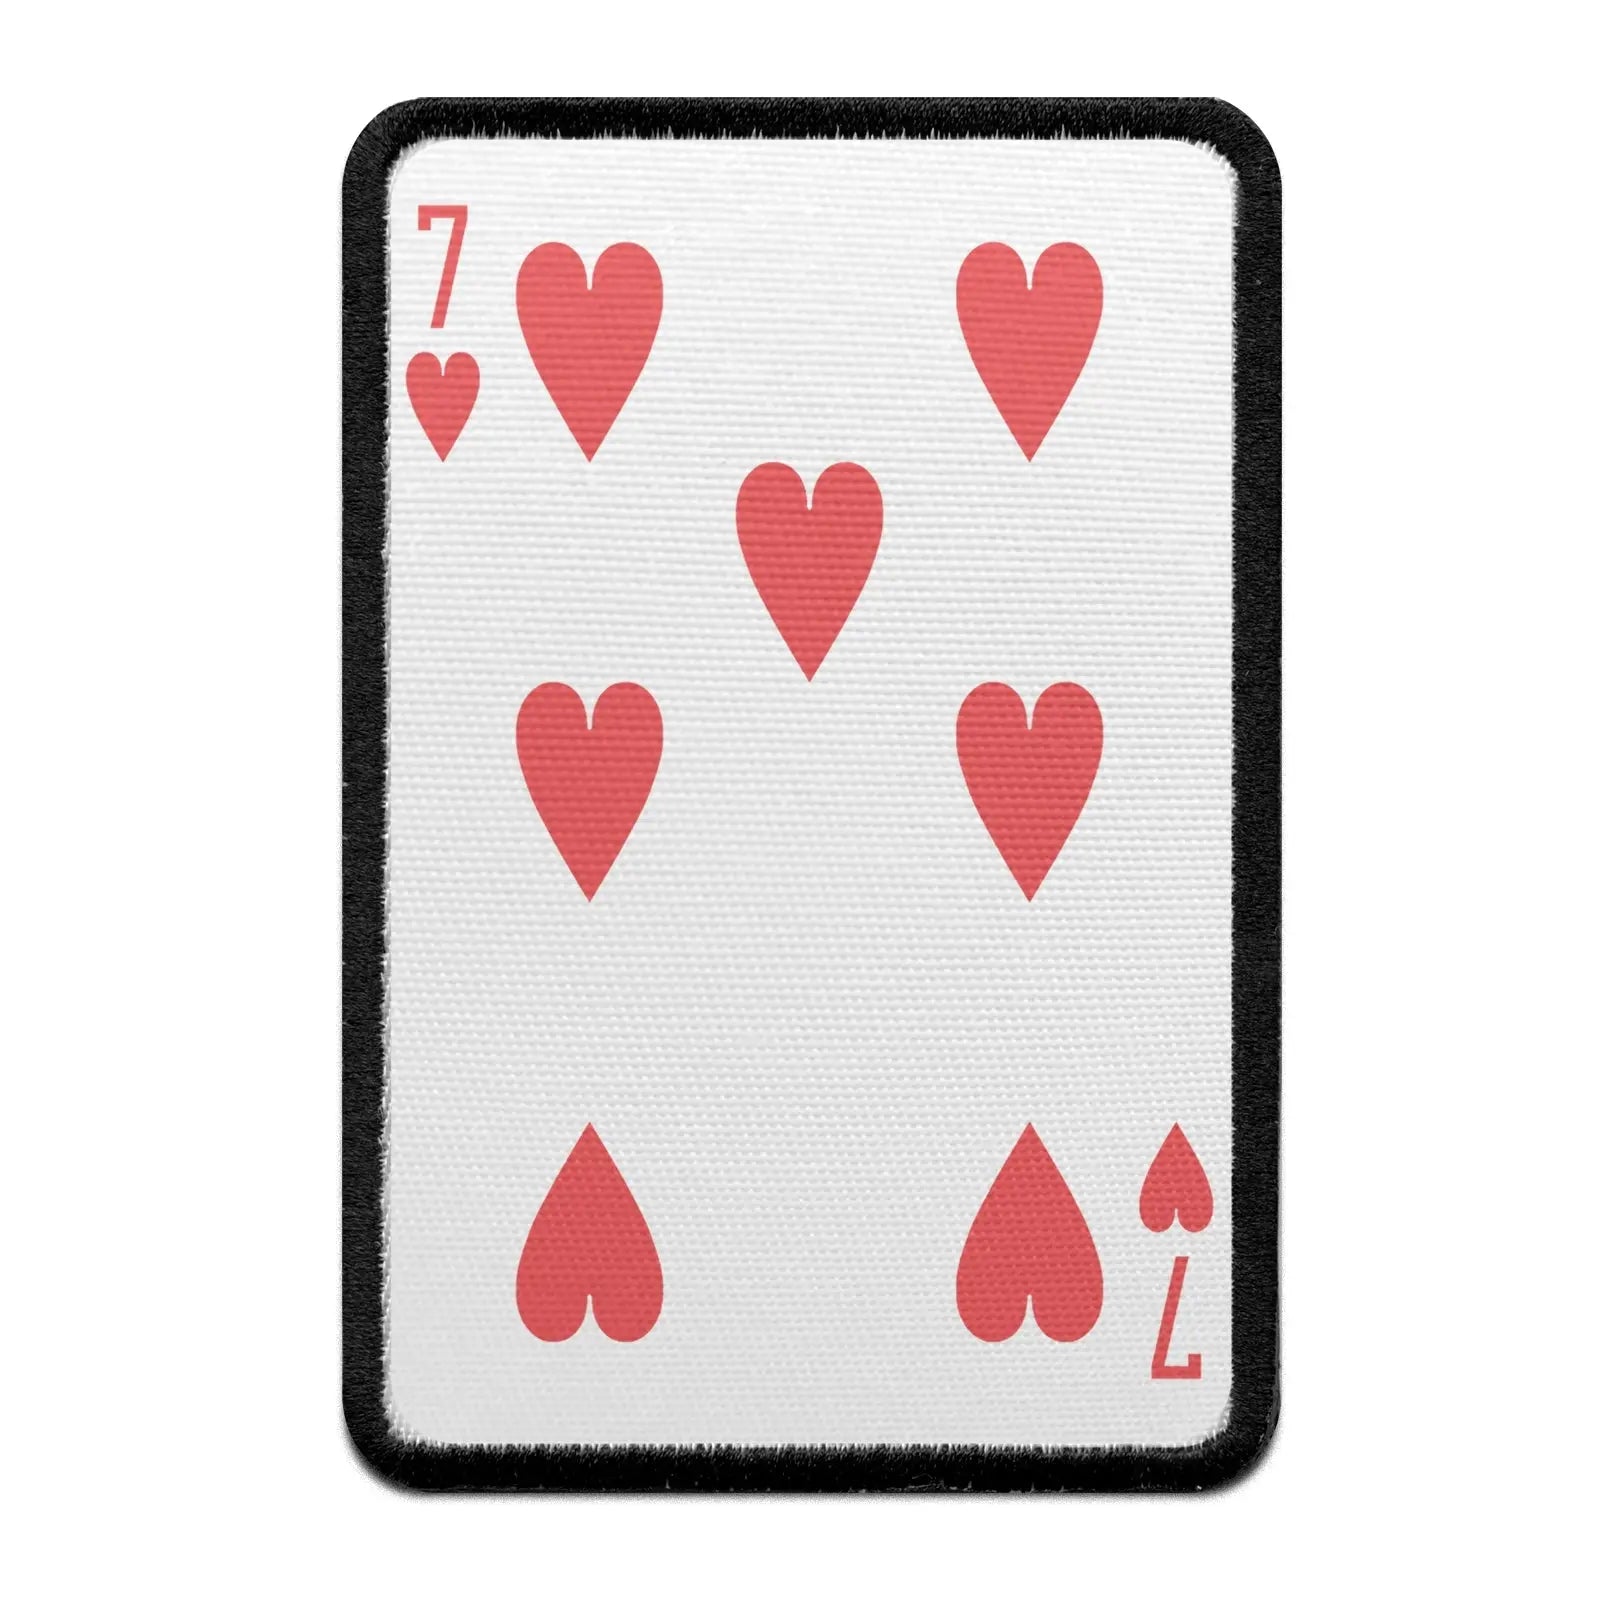 Seven Of Hearts Card FotoPatch Game Deck Embroidered Iron On 